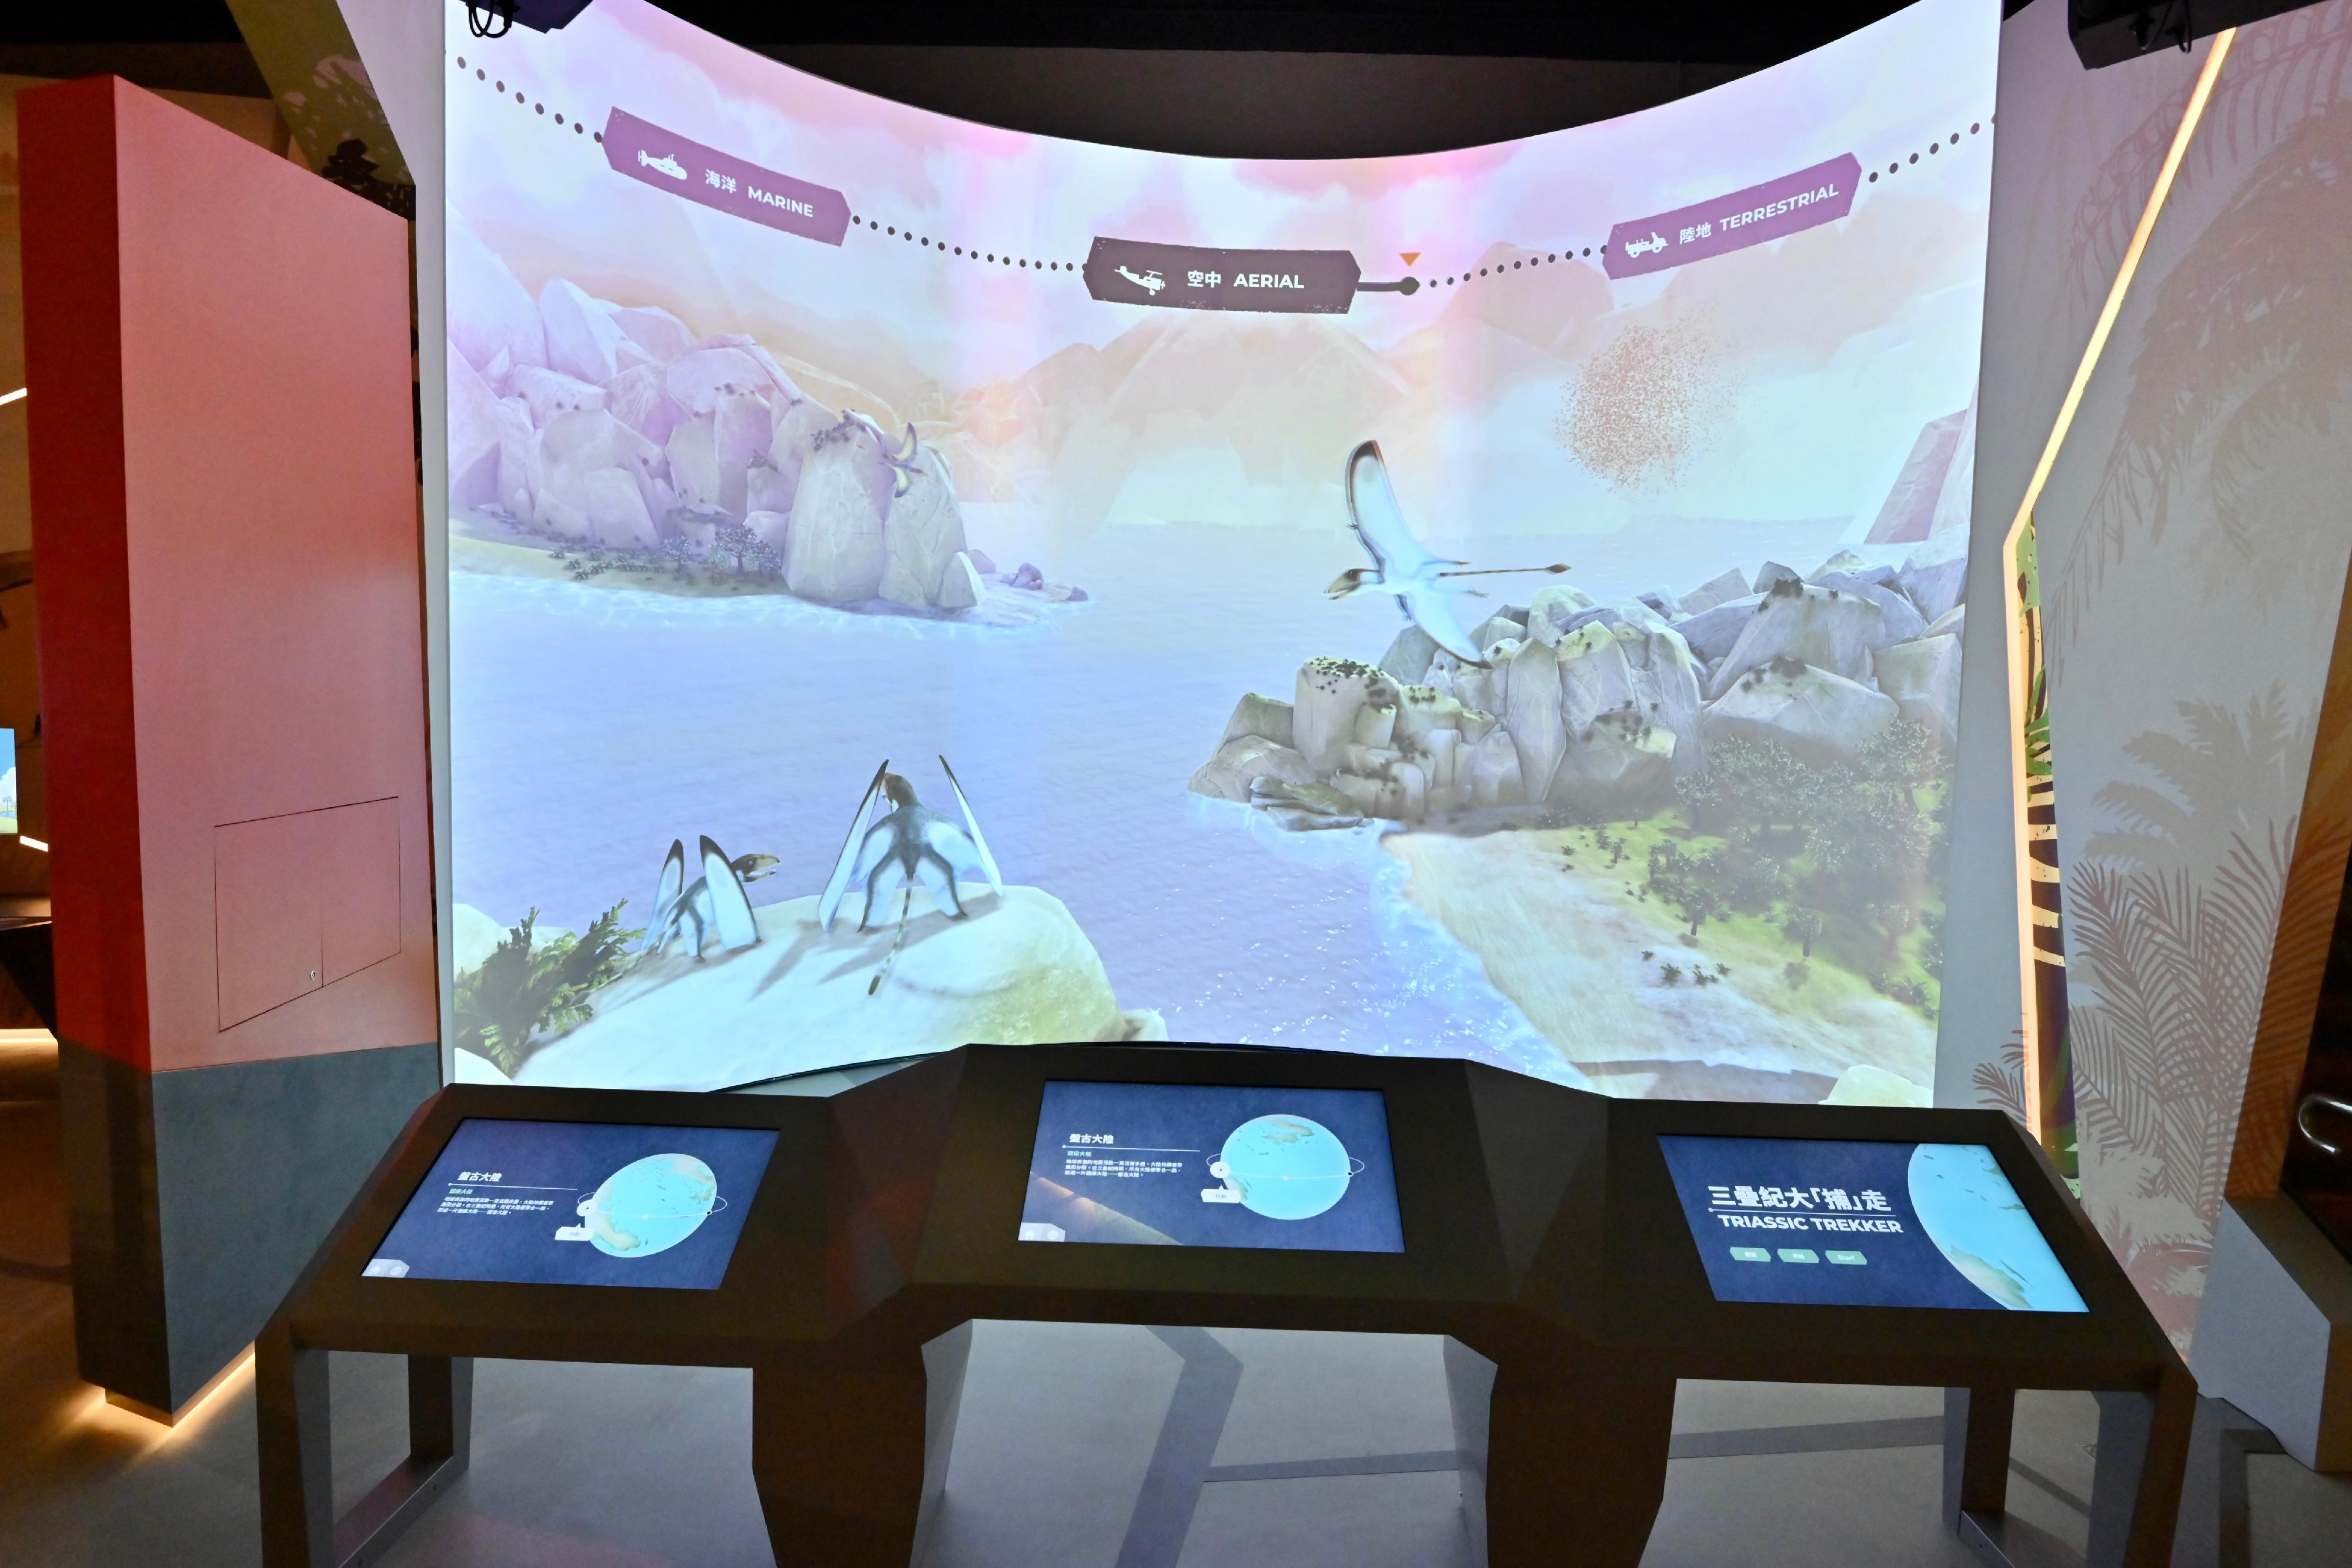 The Hong Kong Science Museum's new exhibition "Extinction·Resilience" will be open to the public from tomorrow (September 15). Visitors can explore the marine, terrestrial, and aerial environments and organisms of the Triassic world through a projection at the gallery.